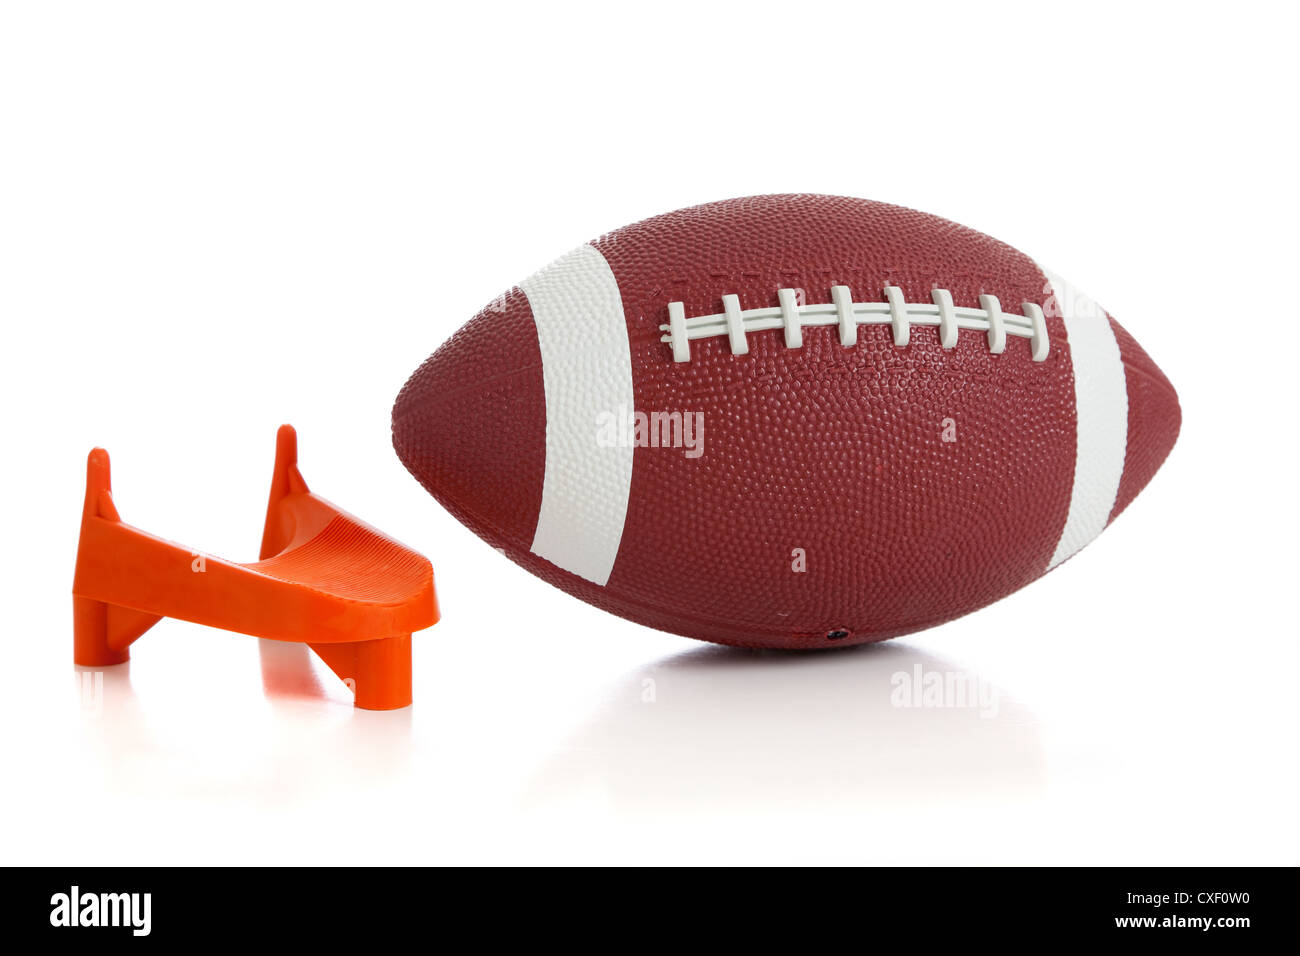 American football and a kicking tee on a white background Stock Photo